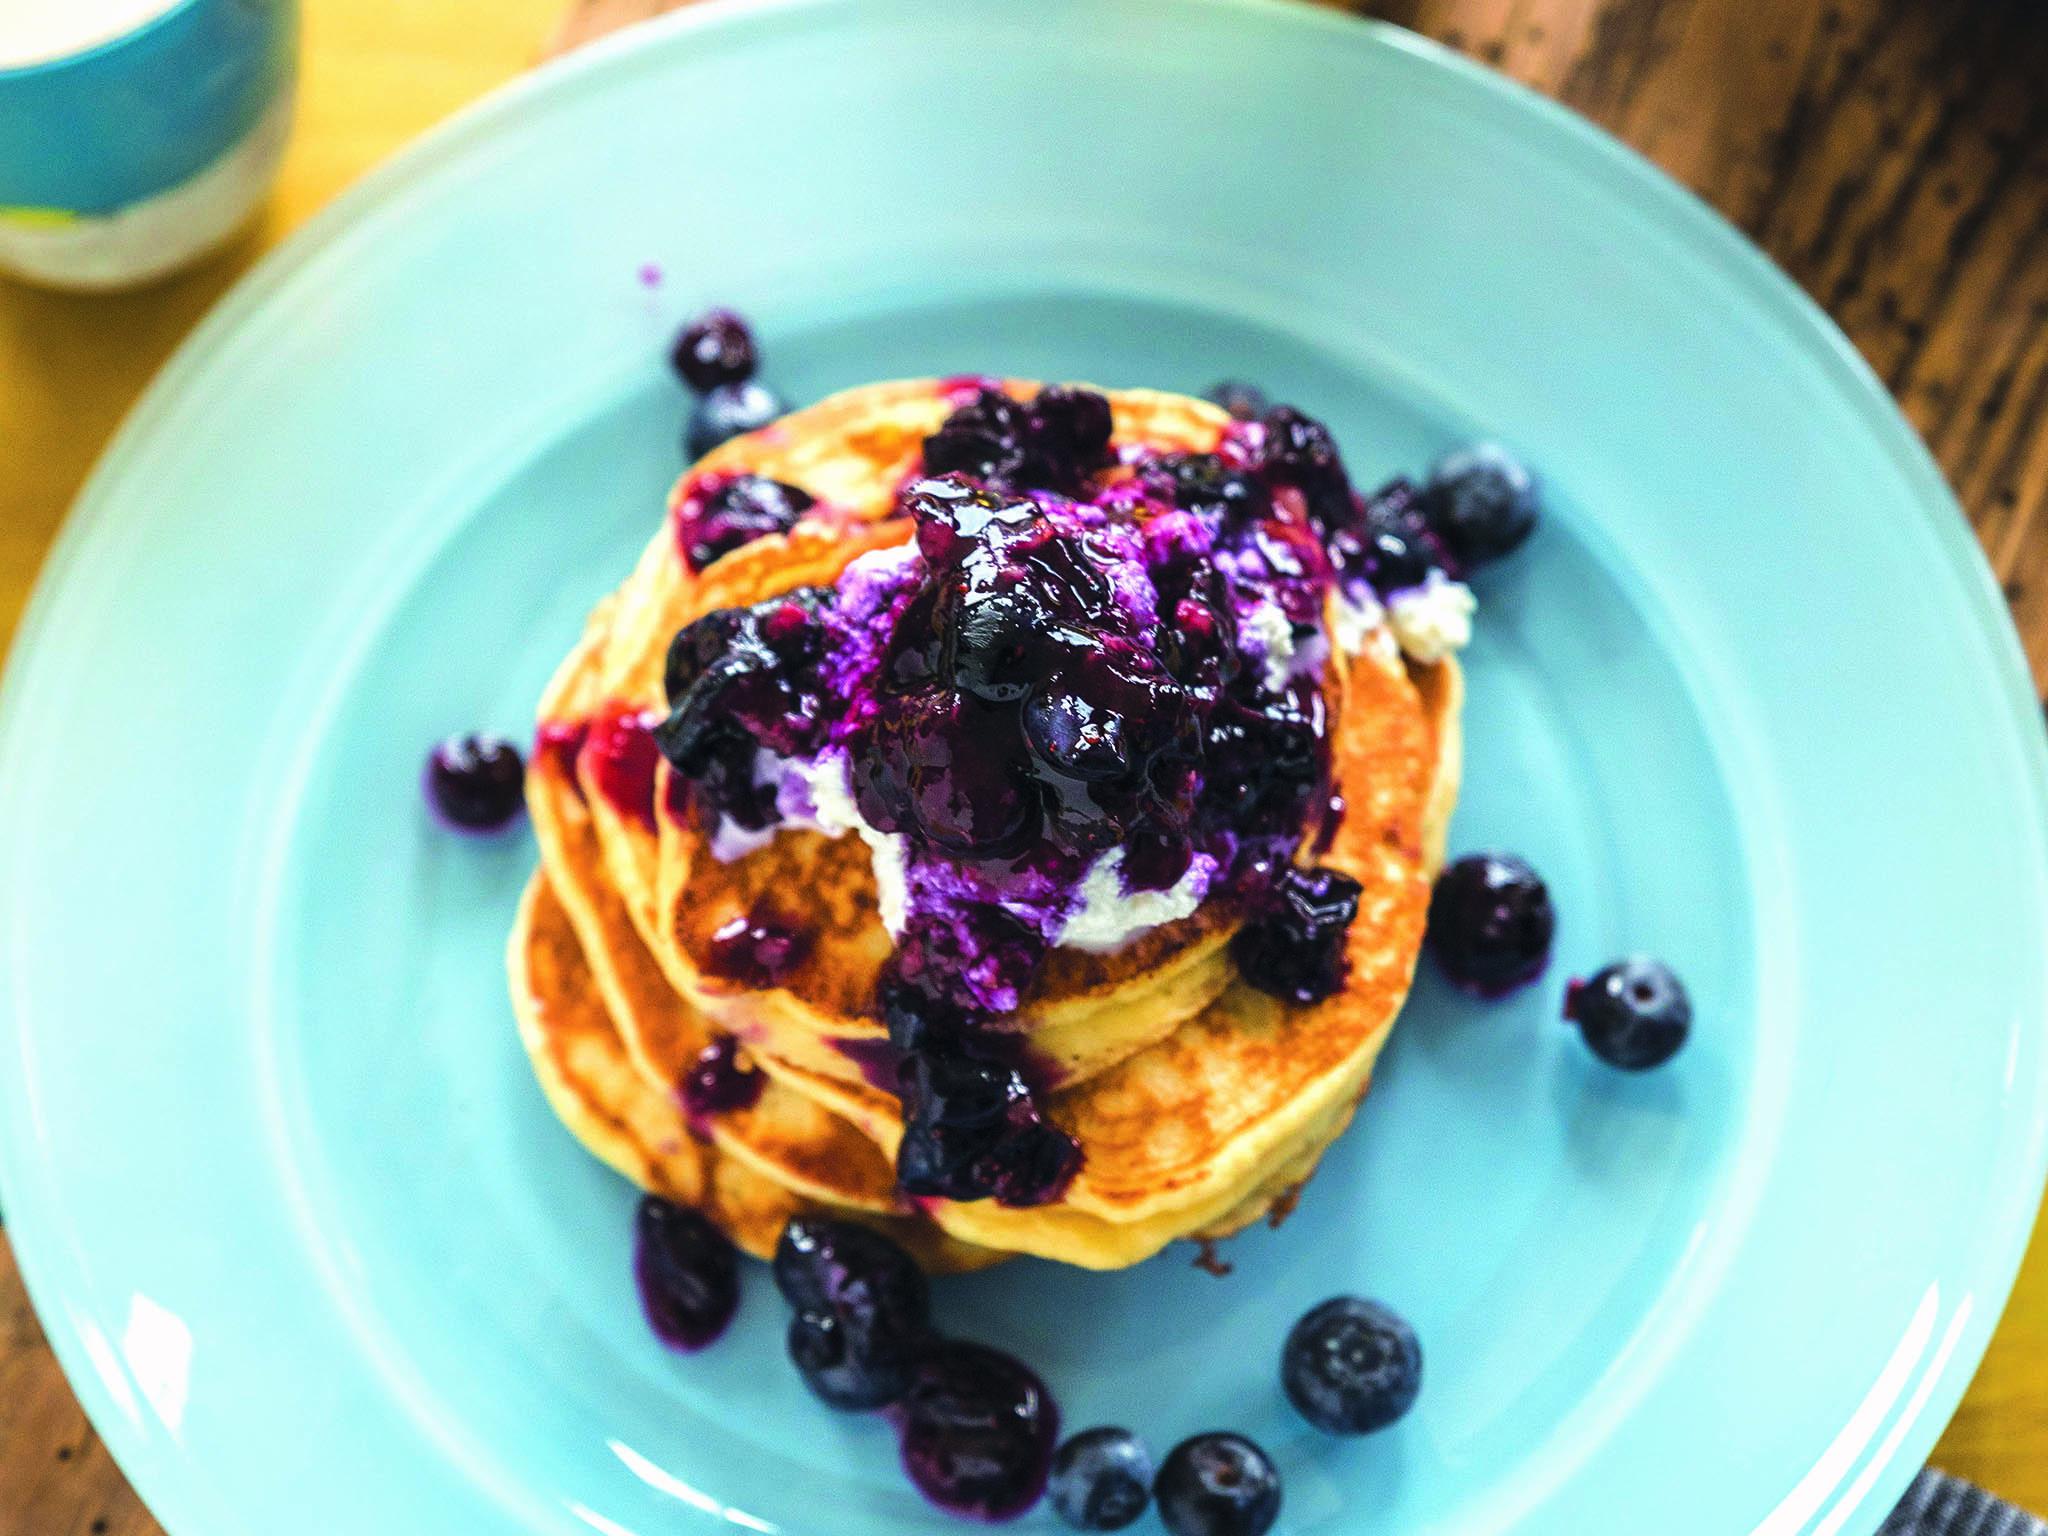 There is no better way to start the day than with fluffy pancakes and fresh blueberry compote